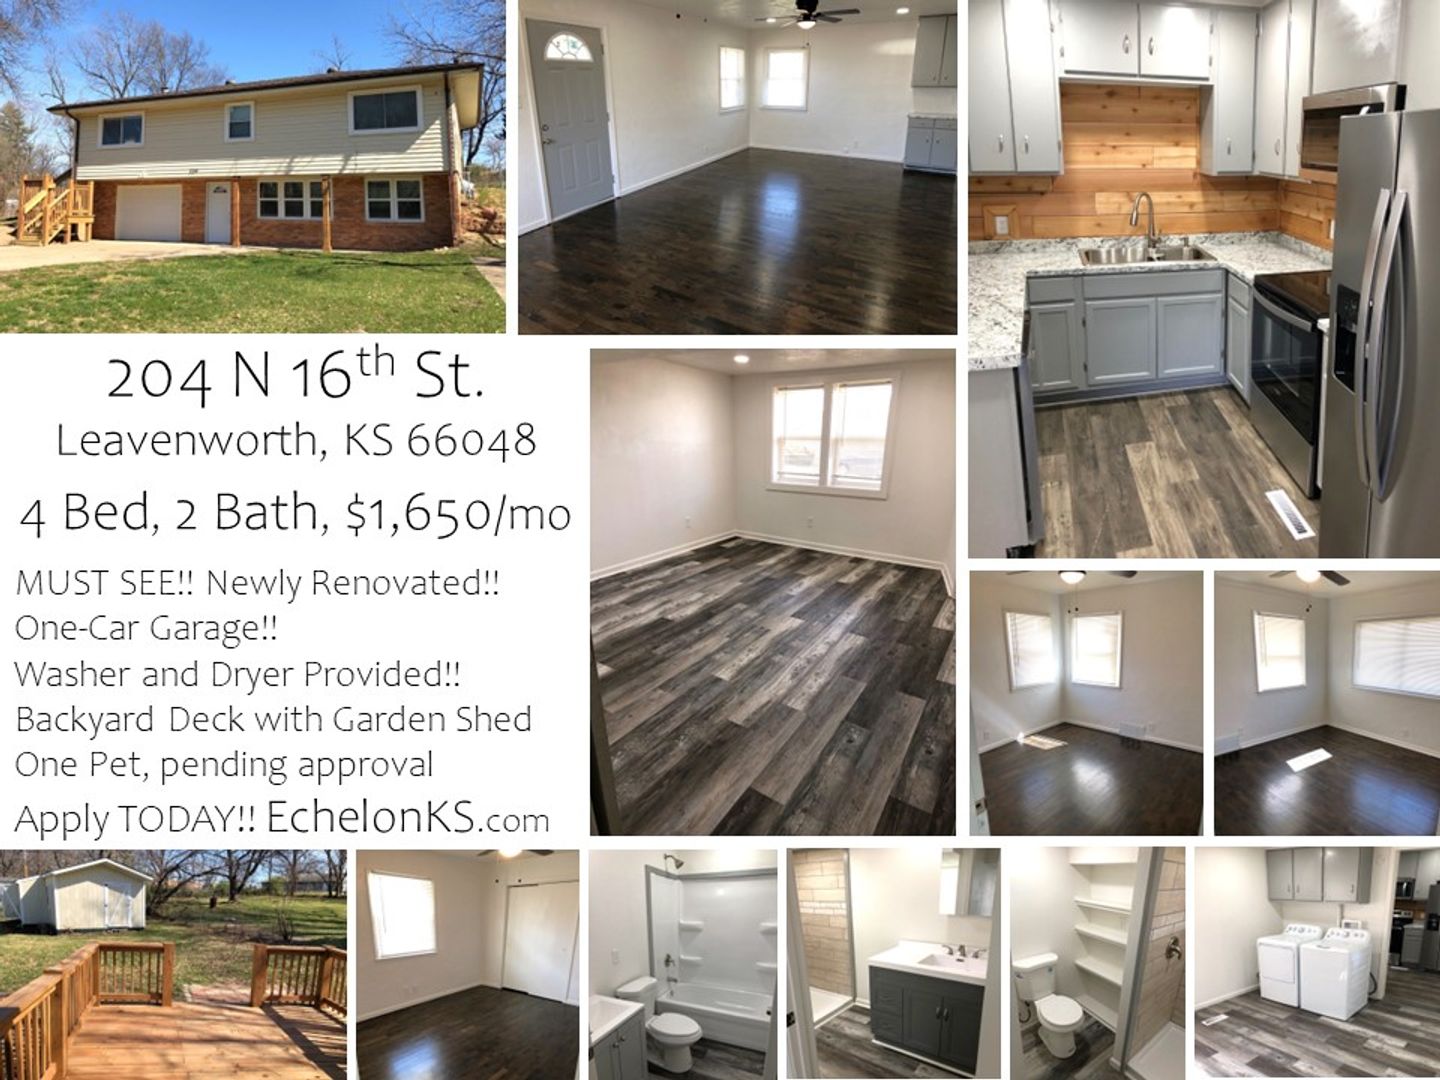 4 Bed, 2 Bath House - Newly Renovated!!